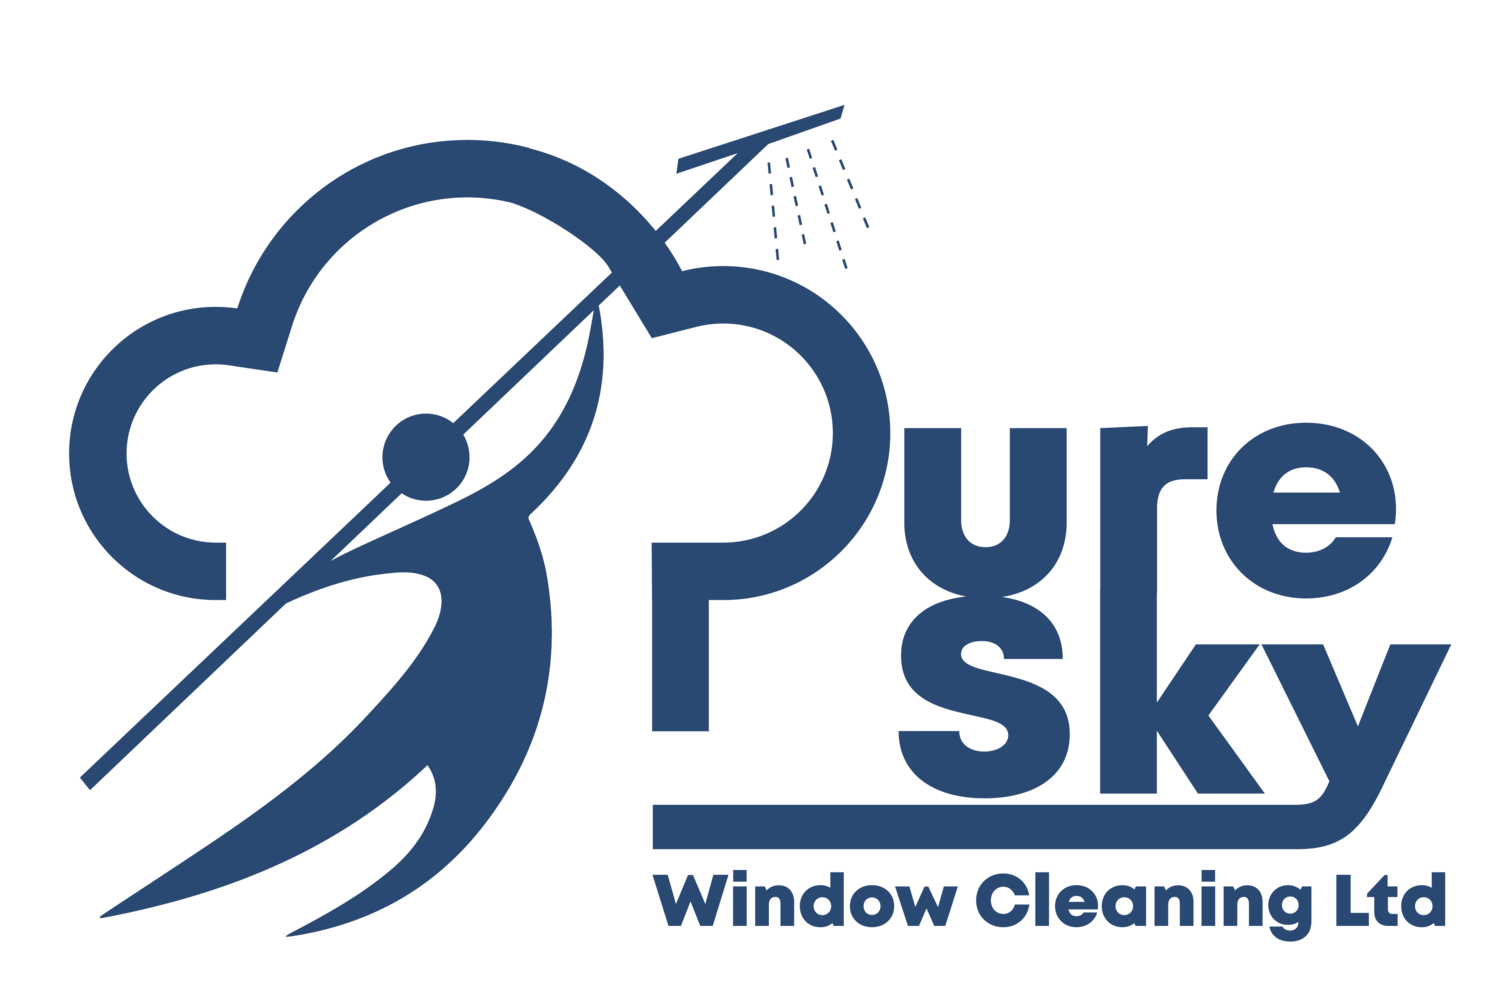 Puresky Window Cleaning Co.